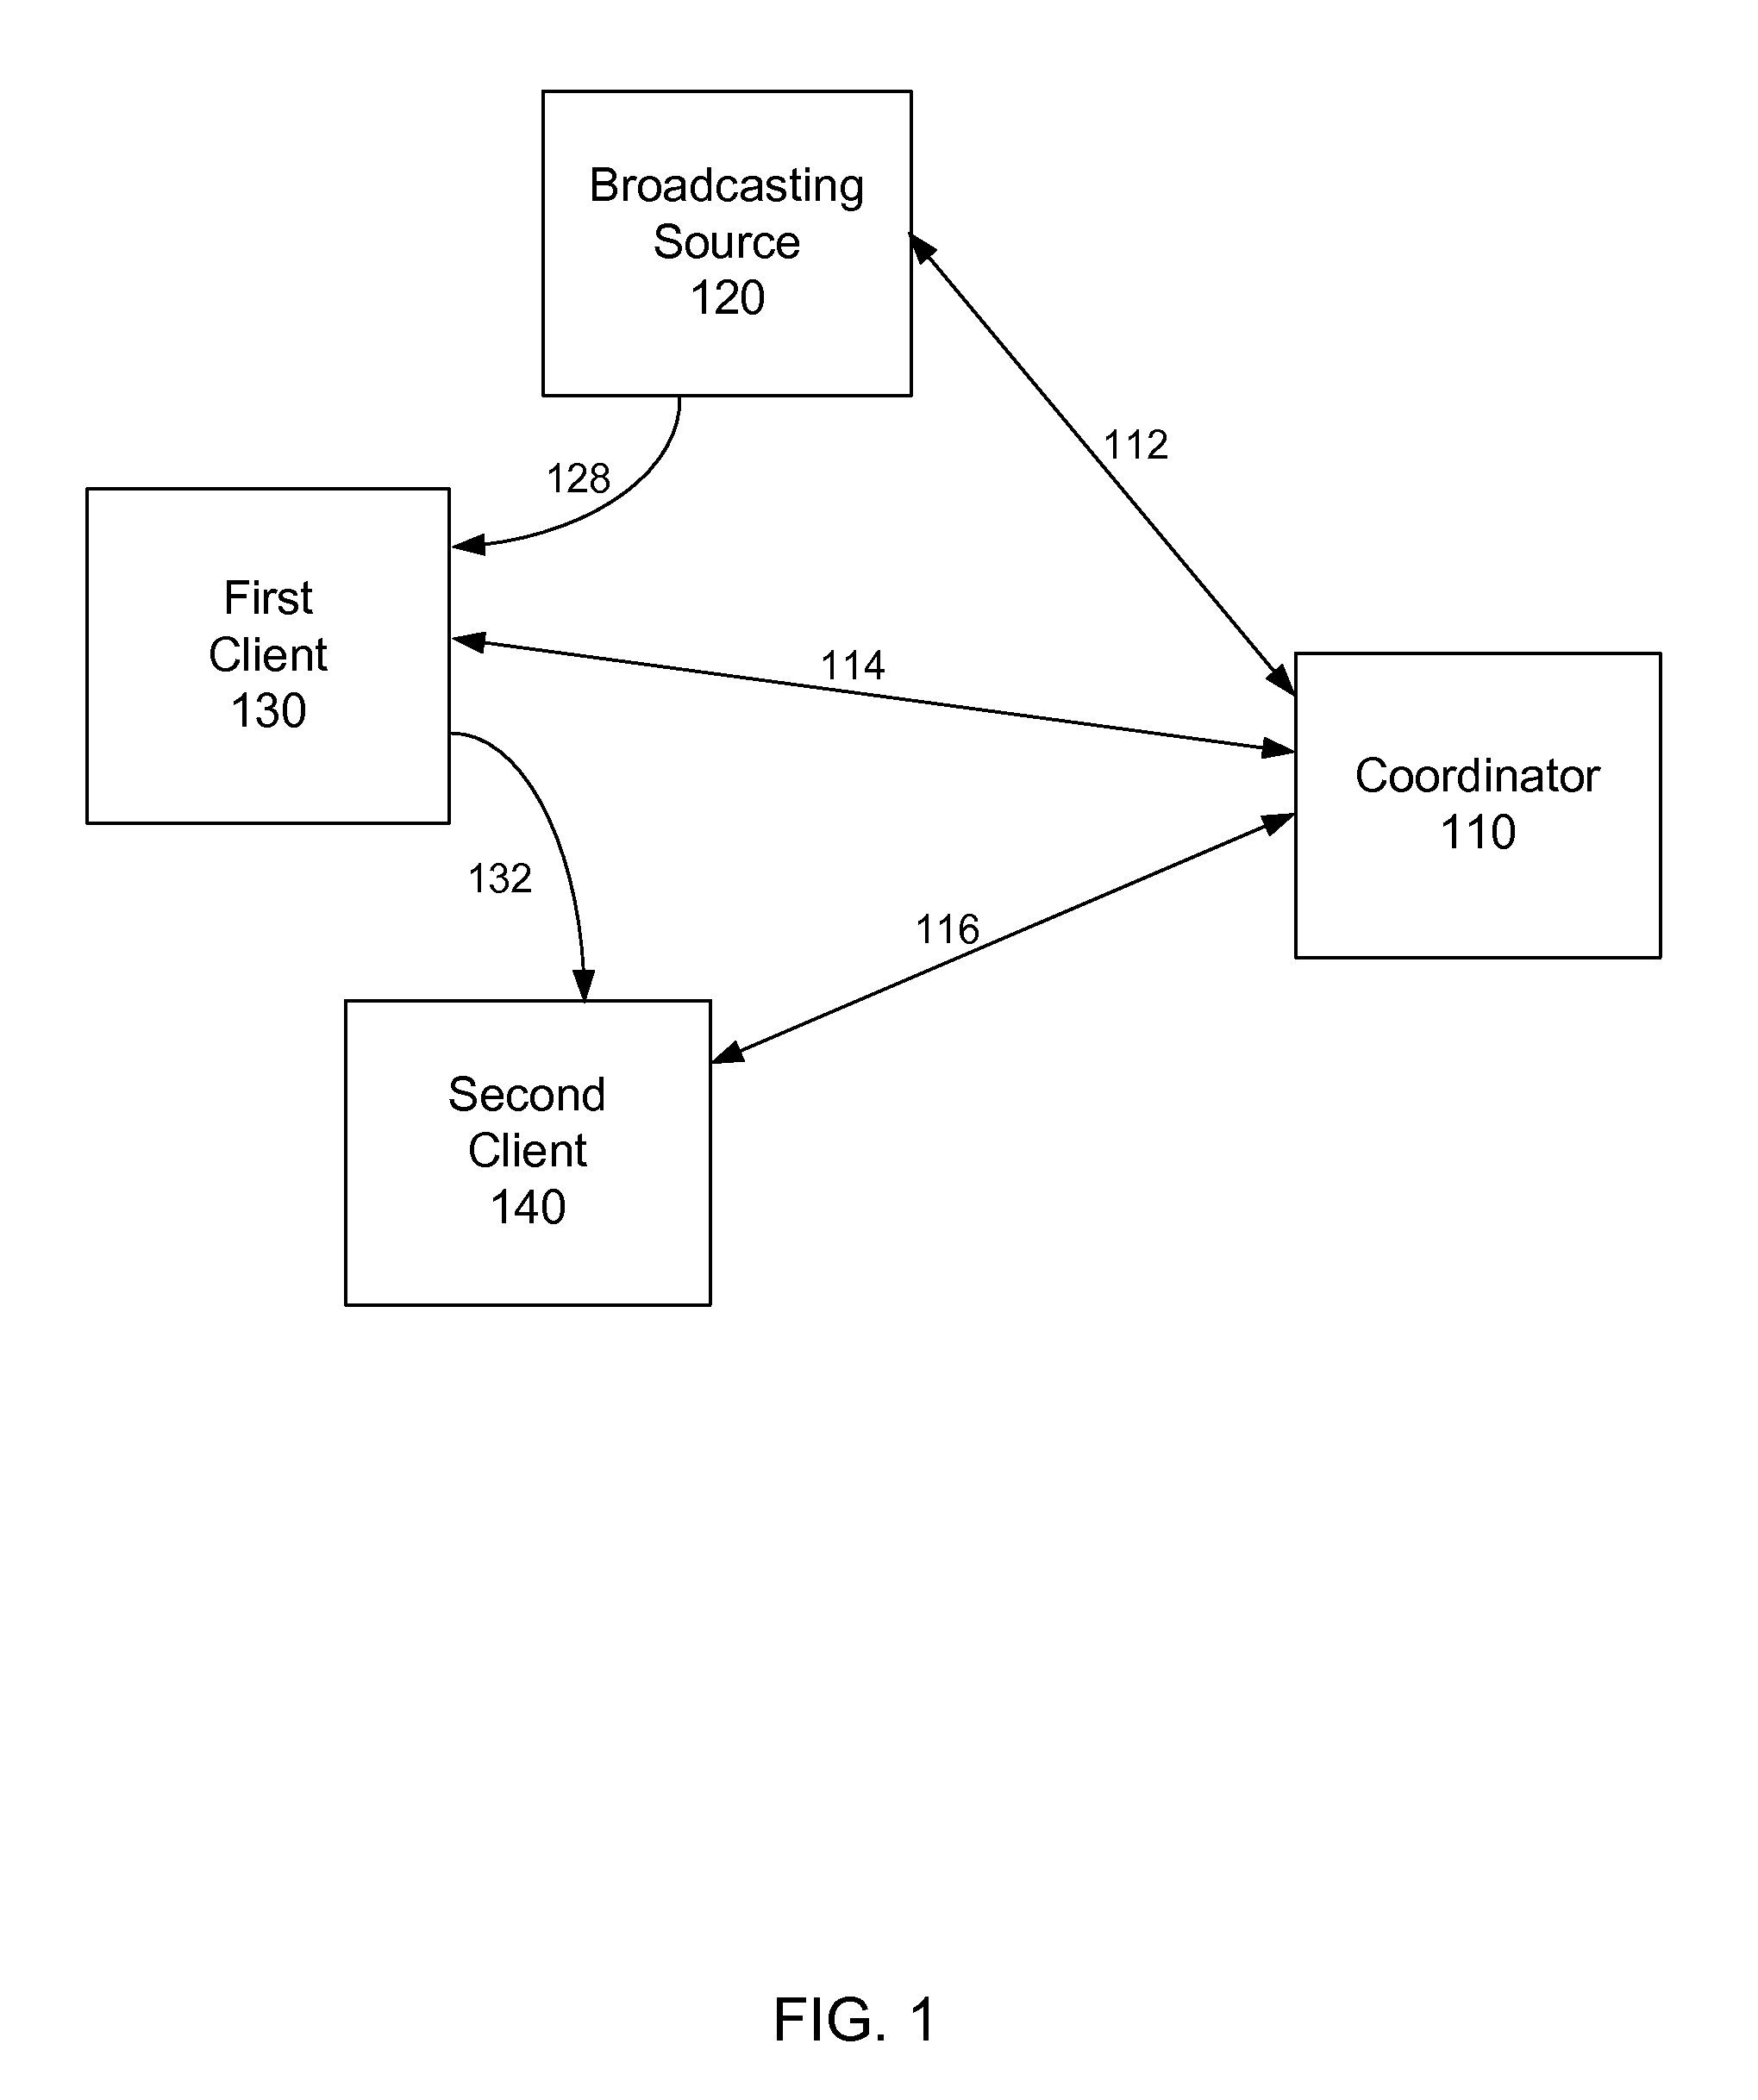 Method and system to daisy-chain access to video resources